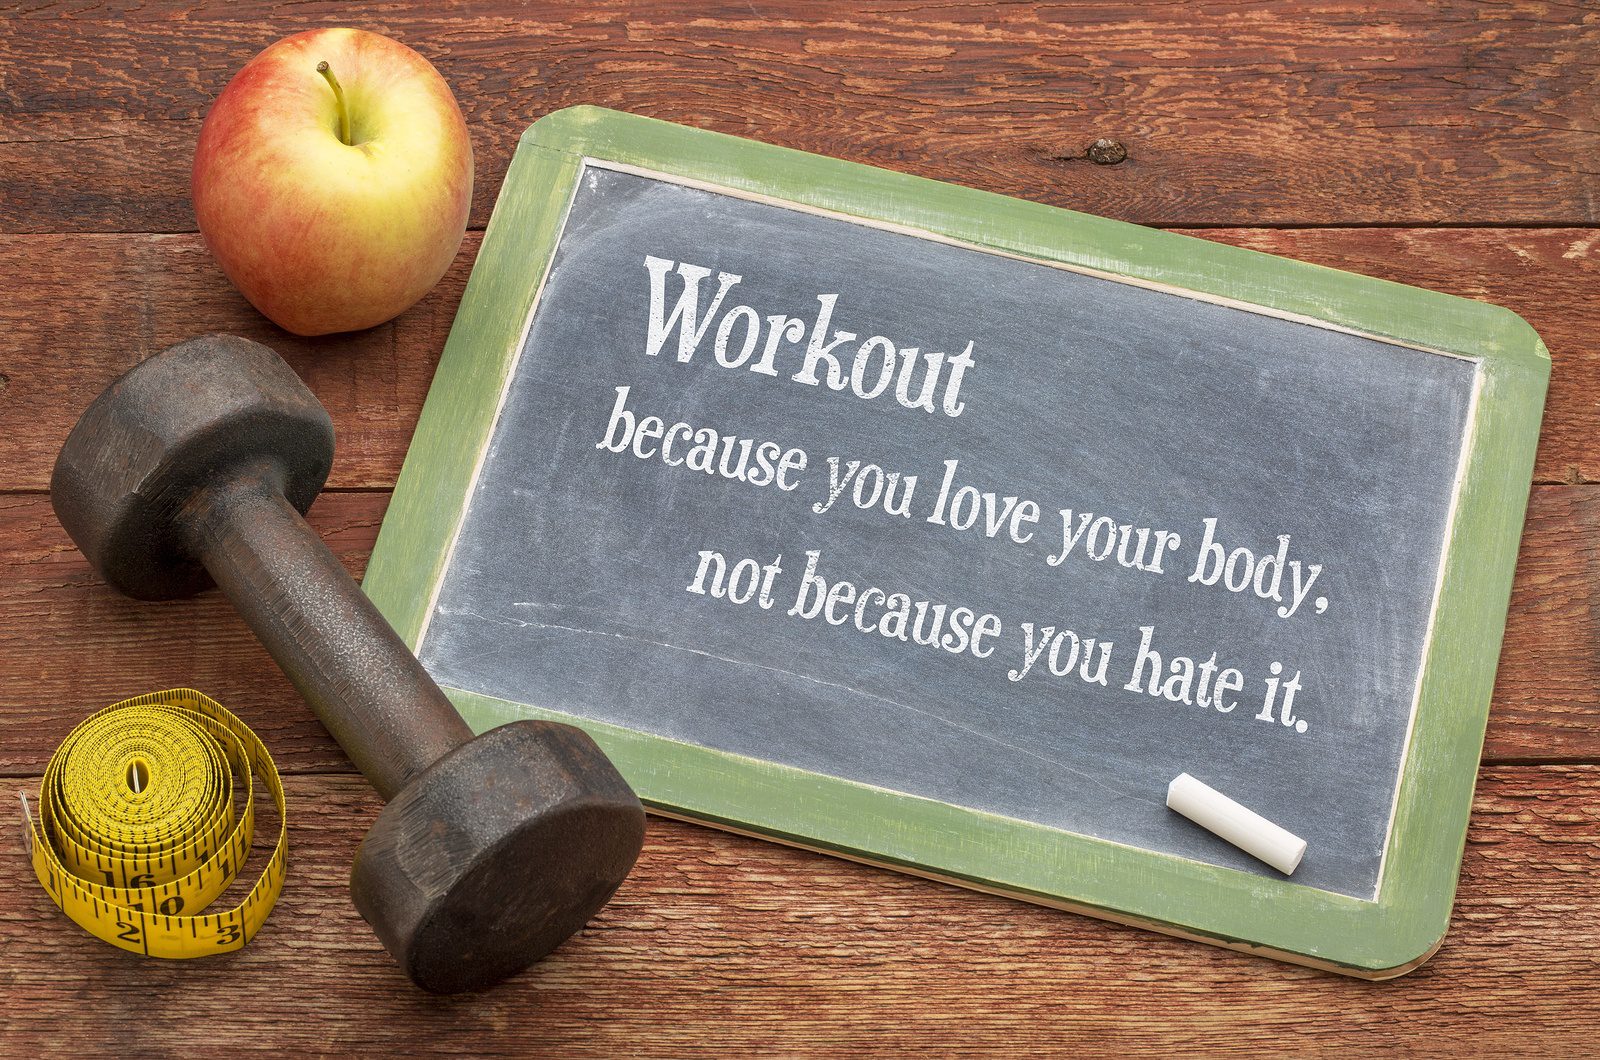 bigstock-Workout-because-you-love-your--184100230